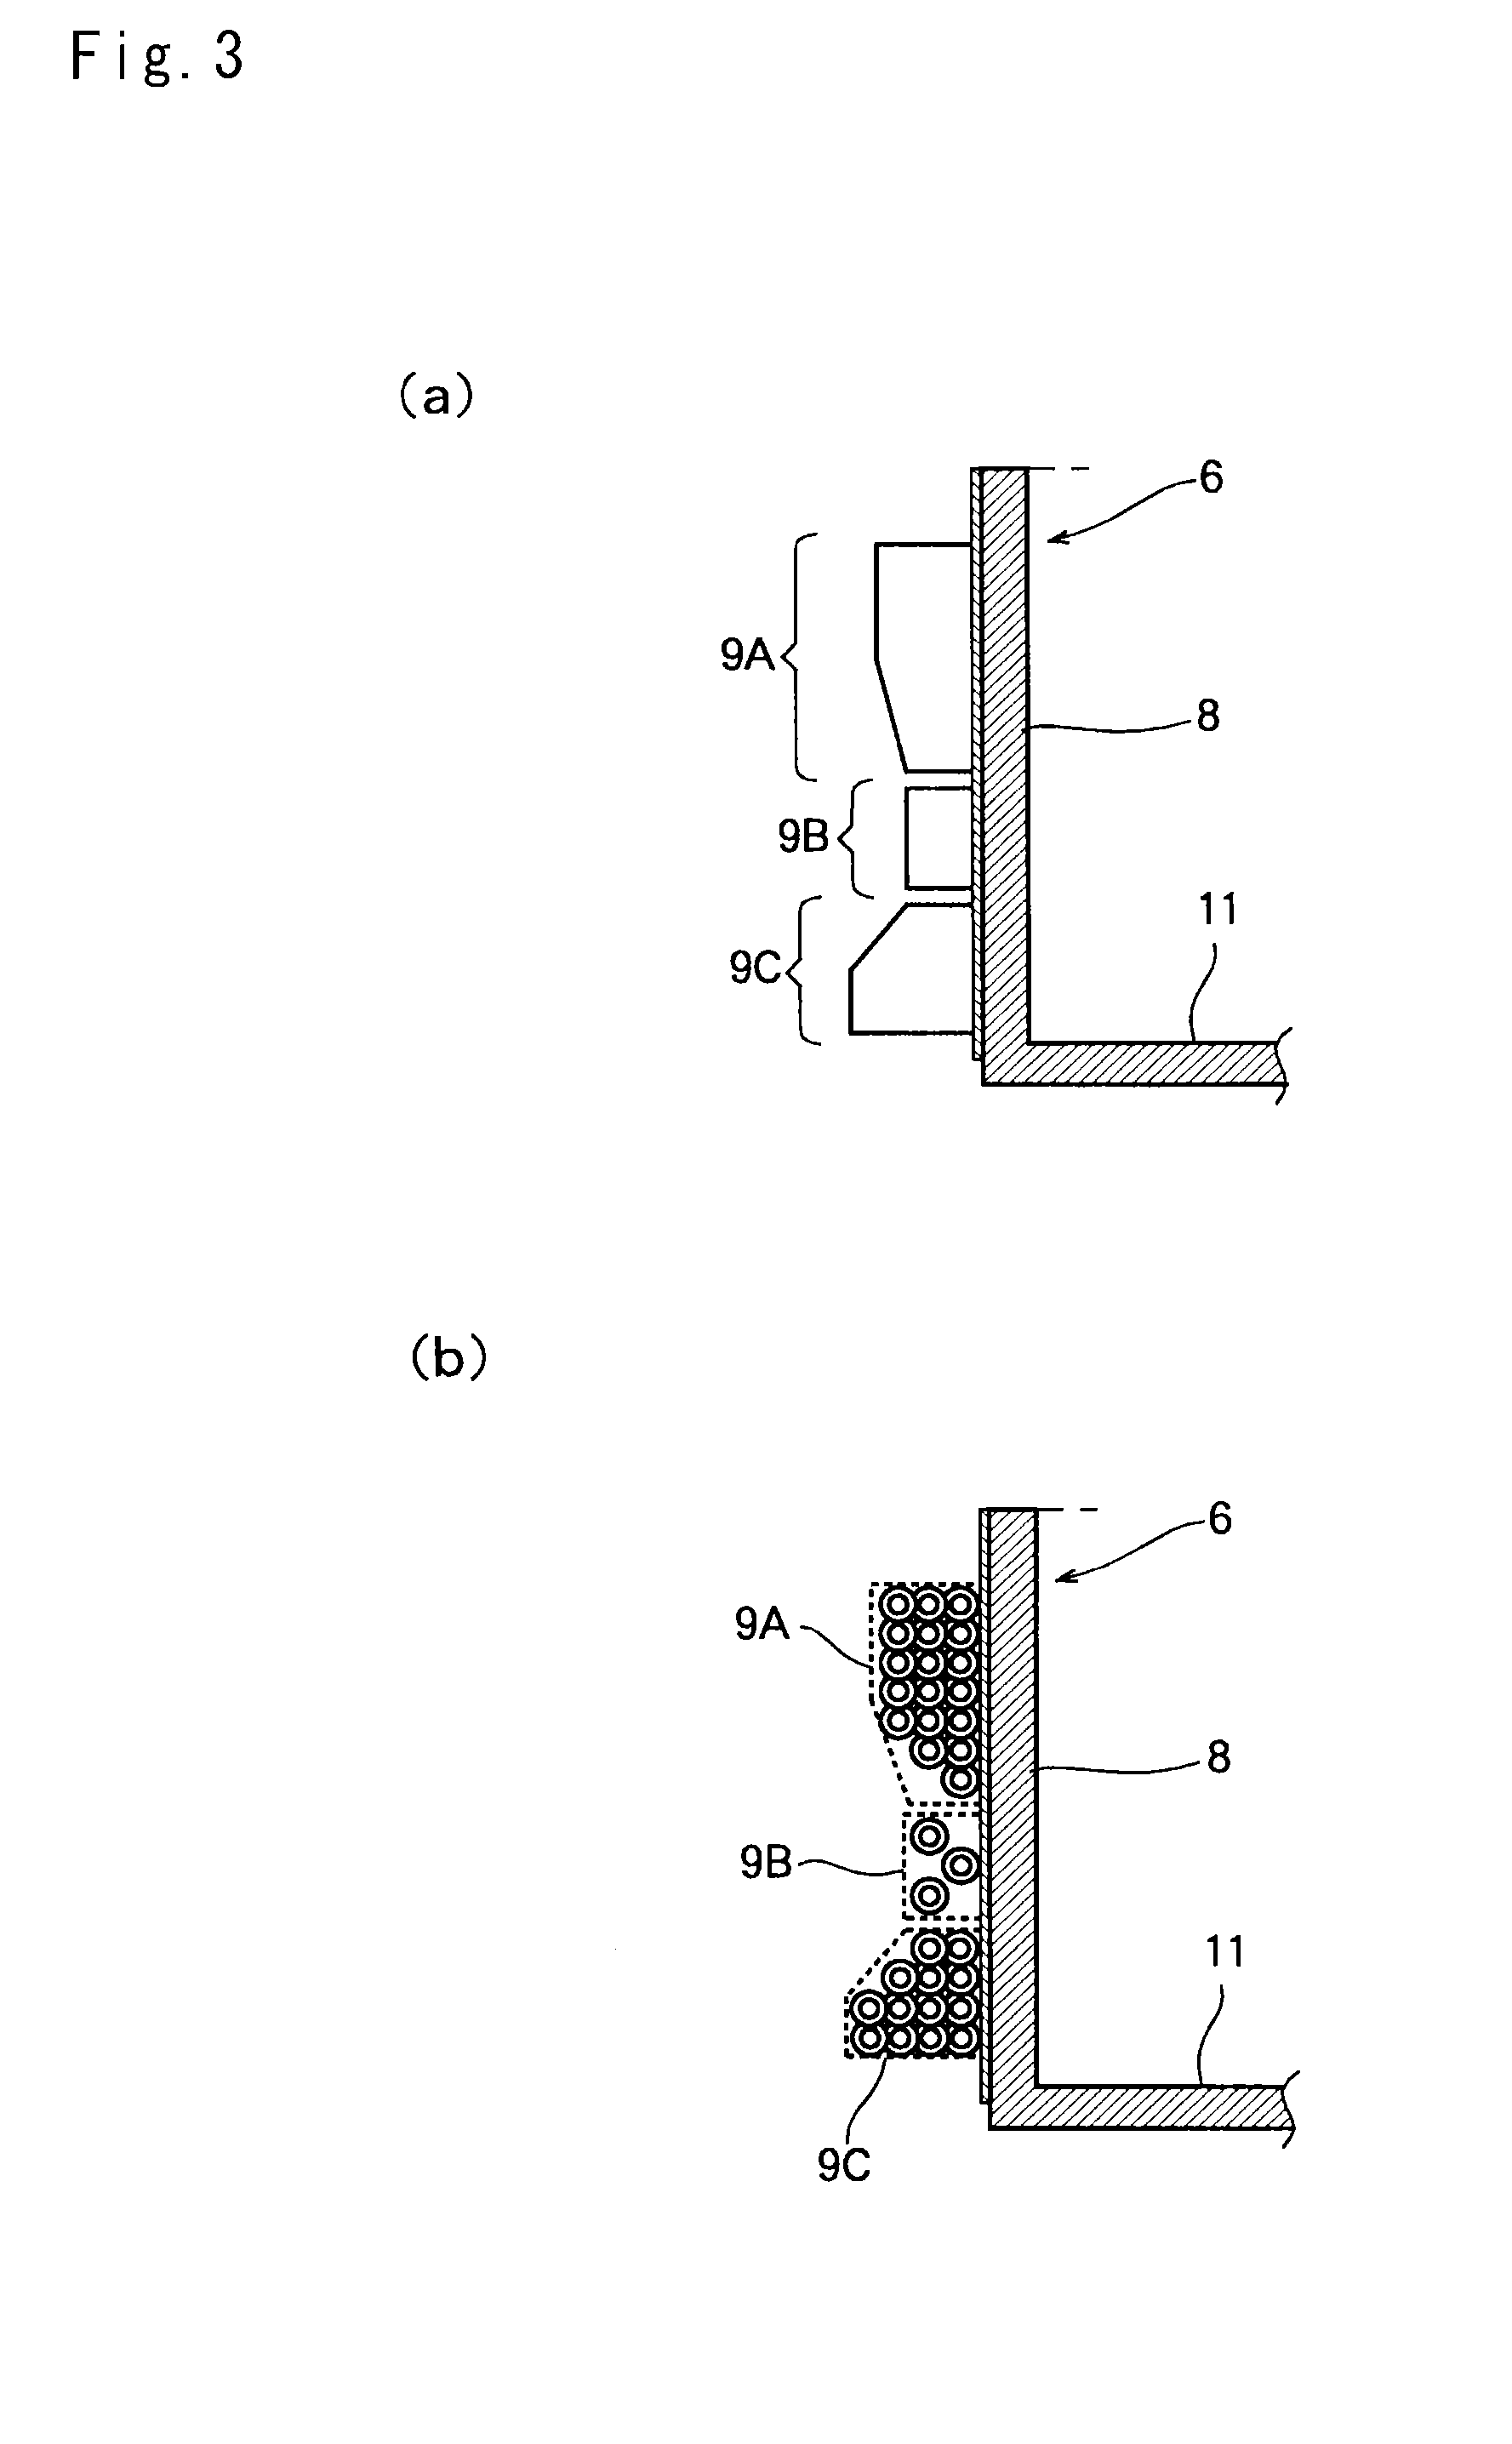 Induction heating apparatus for a beverage can